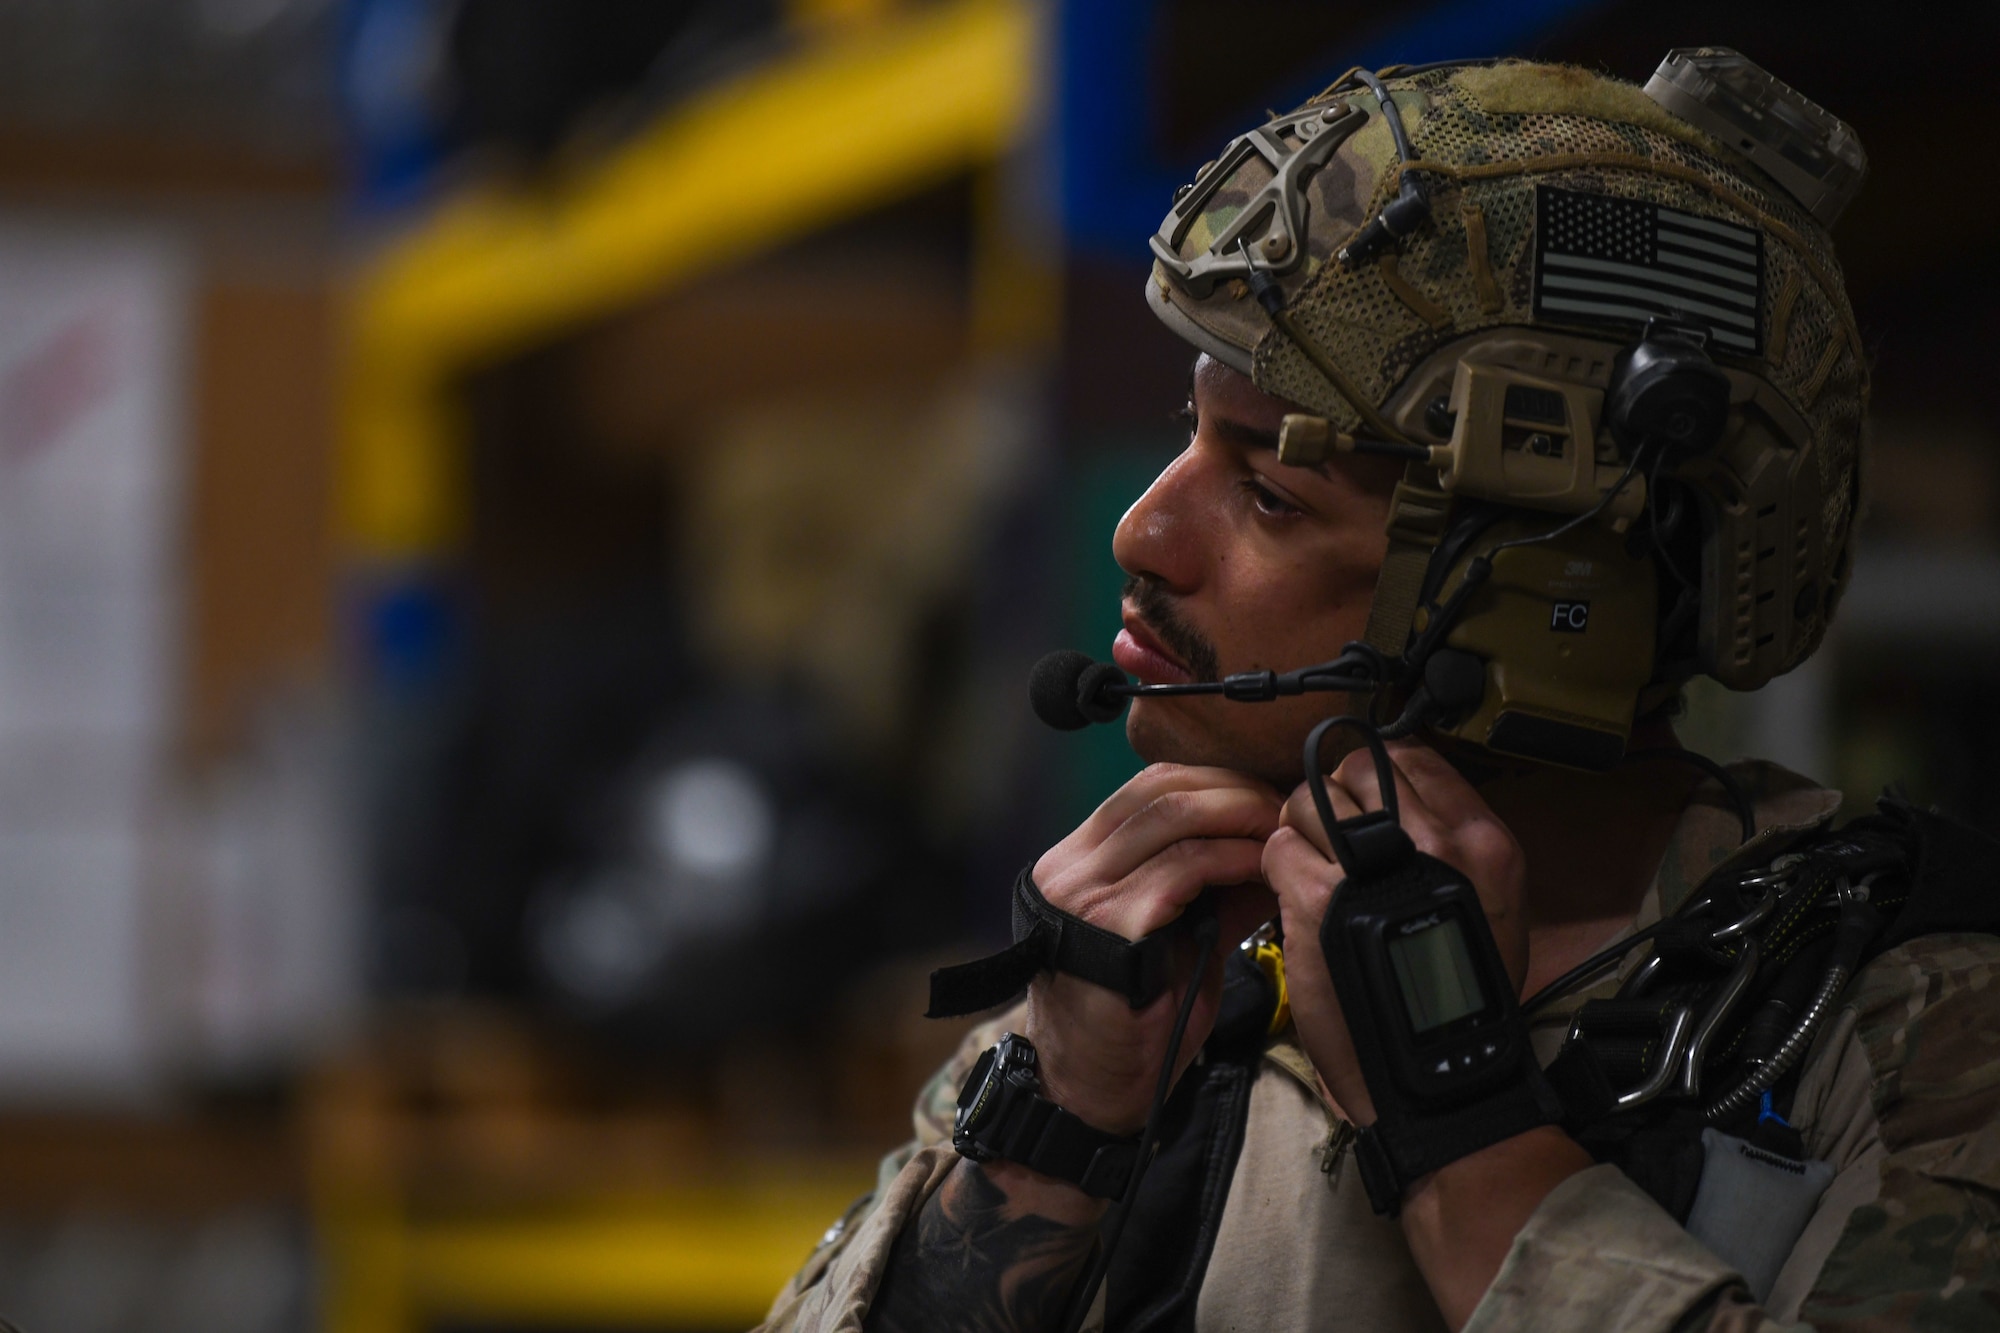 A U.S. Air Force pararescueman assigned to the 82nd Expeditionary Rescue Squadron, adjusts his helmet strap prior to jump training at Camp Lemonnier, Djibouti, Feb. 15, 2021. The 82nd ERQS maintains jump proficiency to provide secure, reliable, flexible combat search, rescue, and recovery capabilities in support of U.S. Africa Command in North and East Africa. (U.S. Air Force photo by Senior Airman Ericka A. Woolever)